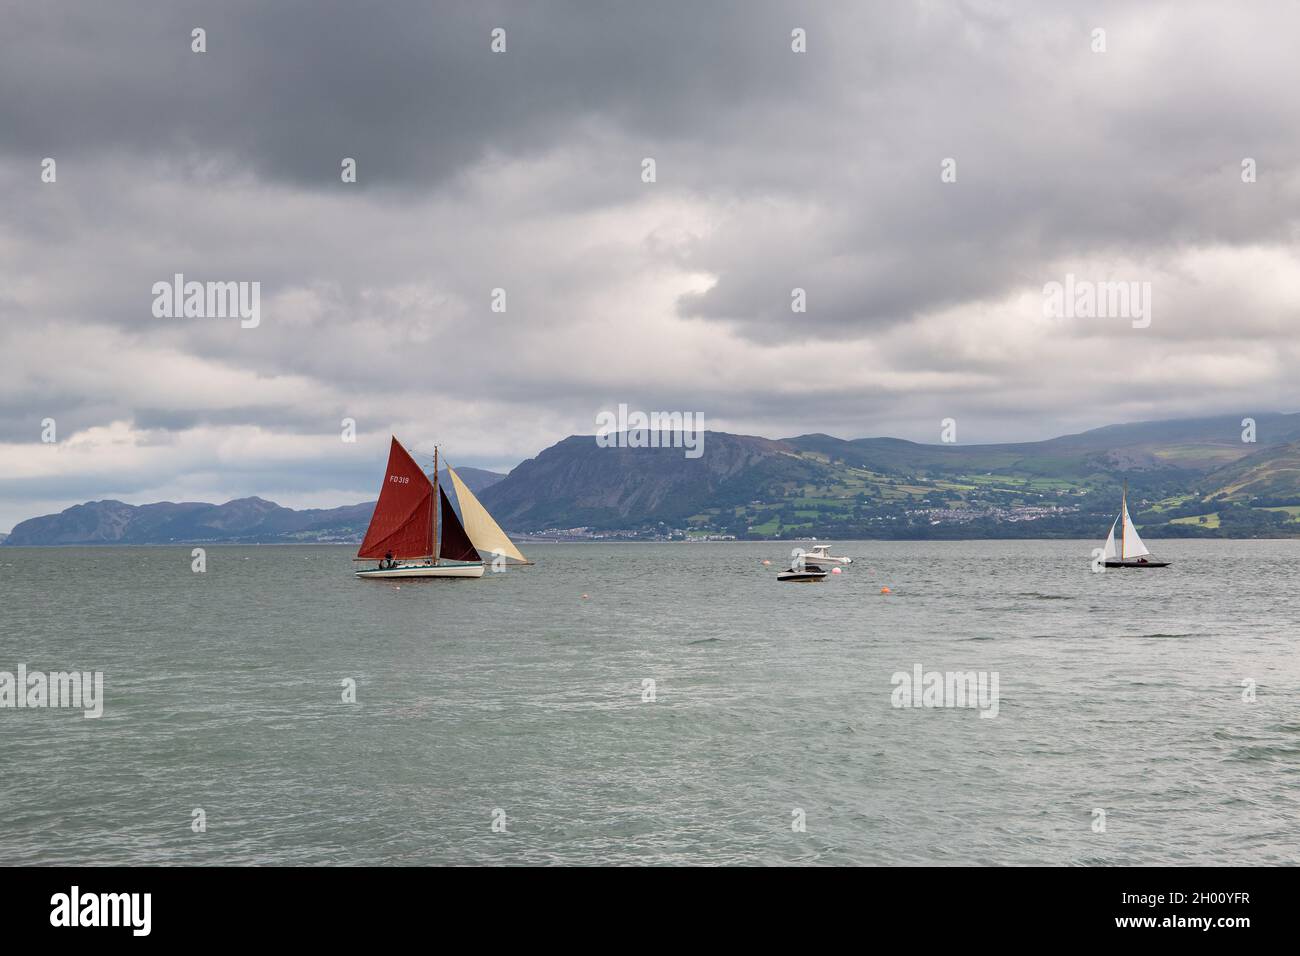 Beaumaris, Wales: Sailing boats on the Menai strait, with mountains of Snowdonia in the distance. Stock Photo